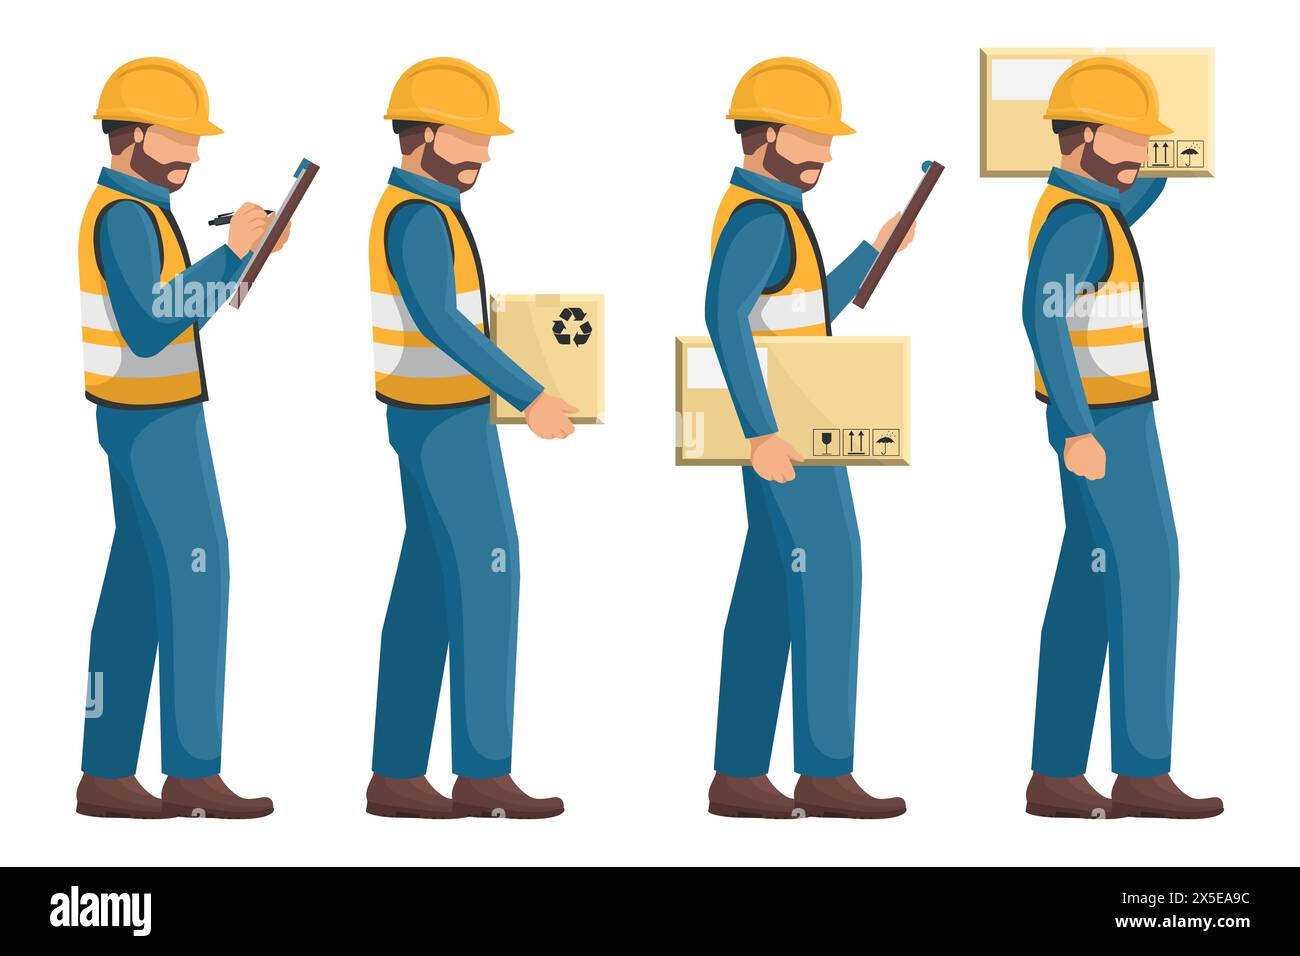 Set of industrial workers with their personal protective equipment, helmet, vest, safety shoes carrying a box checking their order. Safety First. Indu Stock Vector